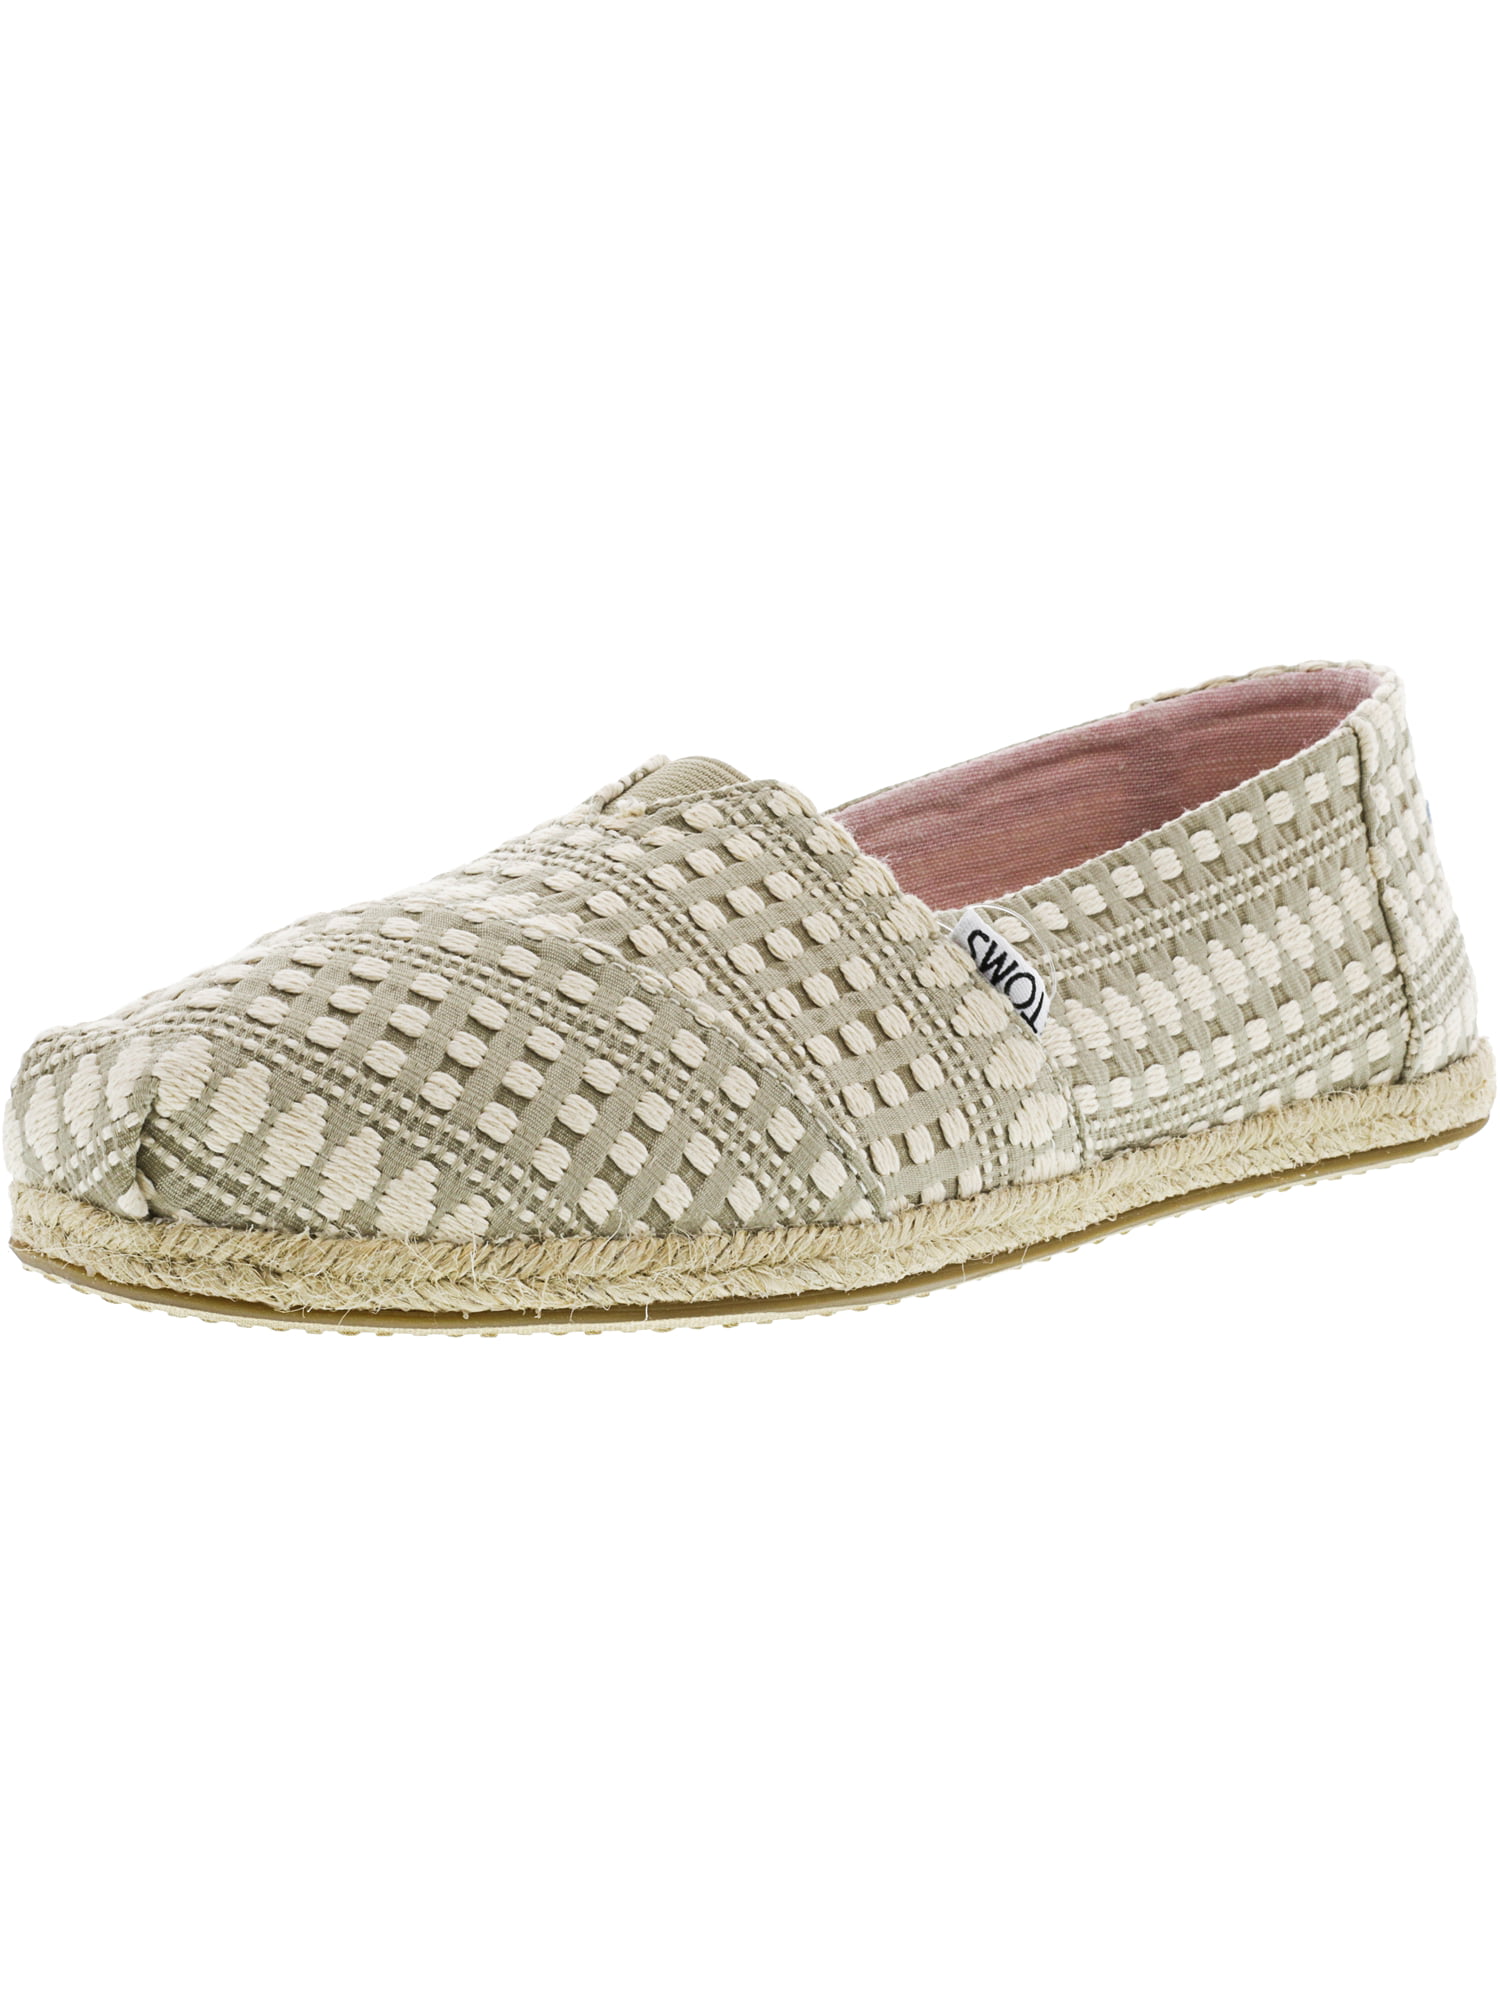 Toms Women's Classic Rope Sole Oxford Tan Diamond Tribal Ankle-High ...